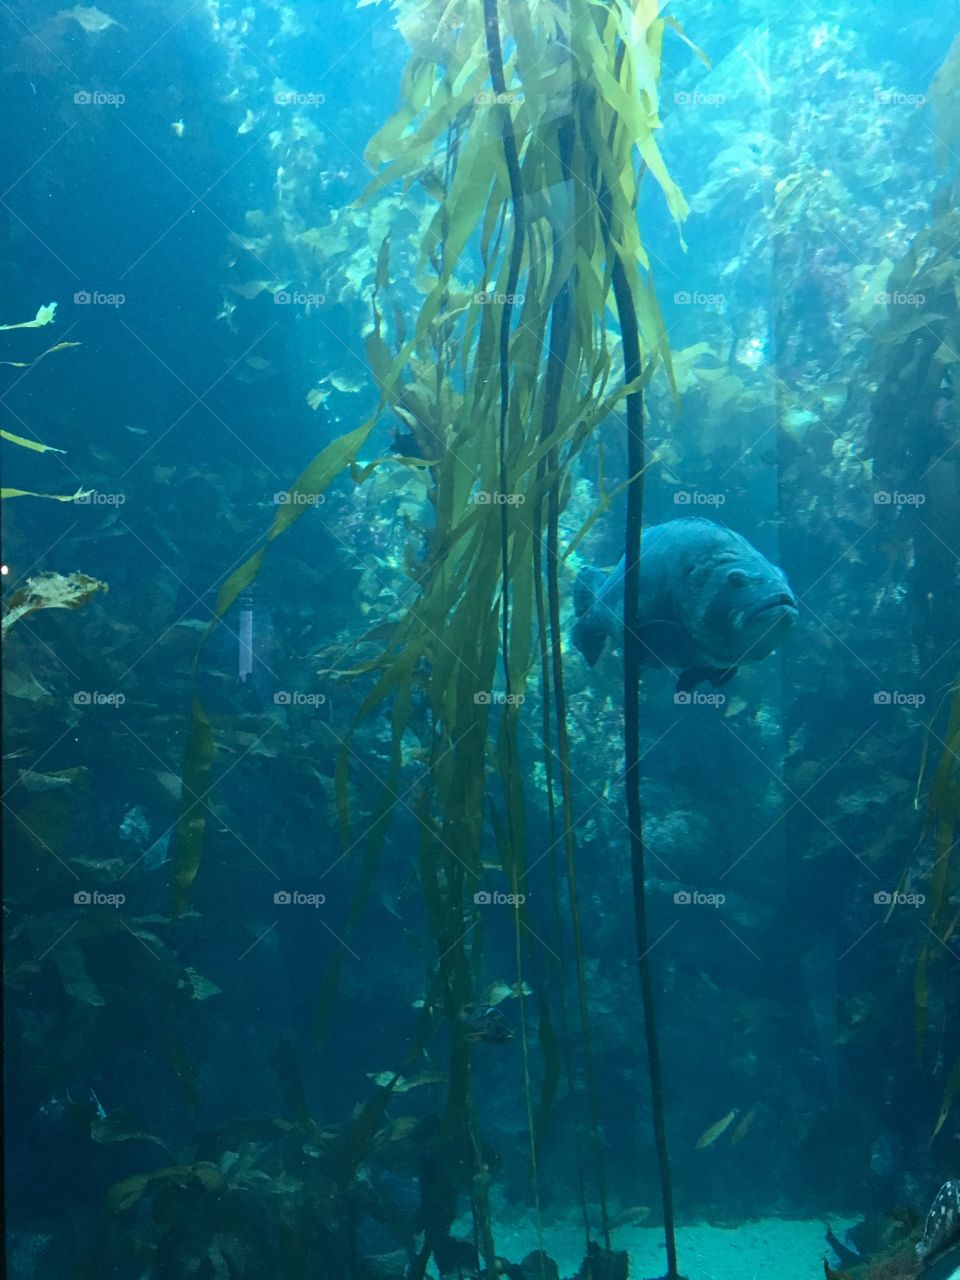 Large sea bass in a tank at the Monterey Bay aquarium 